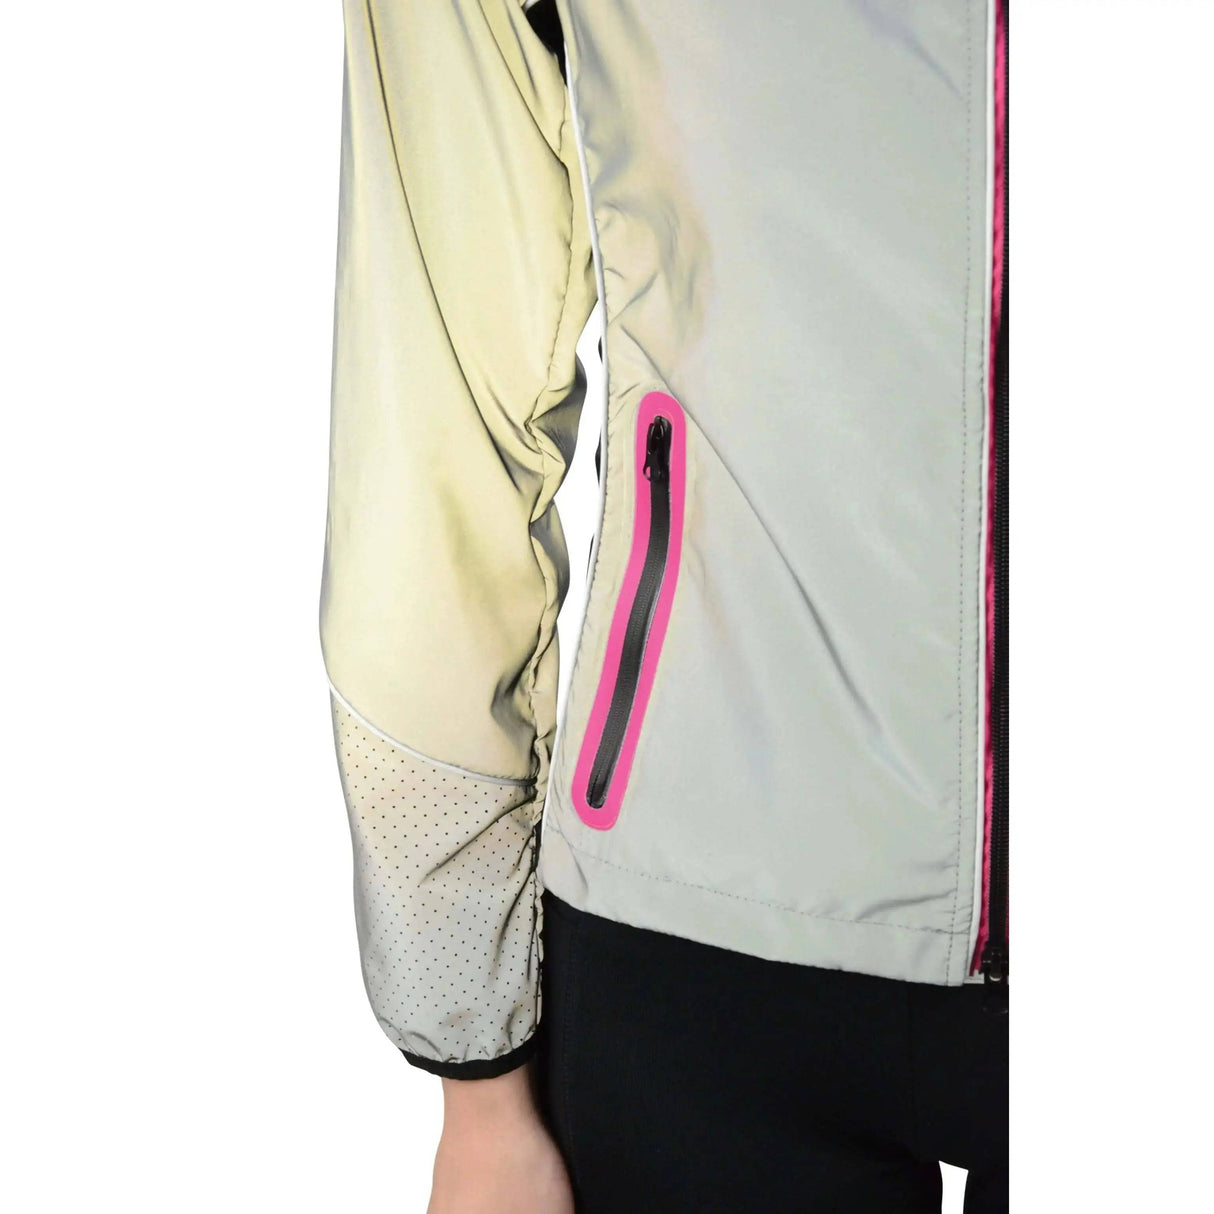 Reflector Jacket by Hy Equestrian Outdoor Coats & Jackets Pink X Small Barnstaple Equestrian Supplies